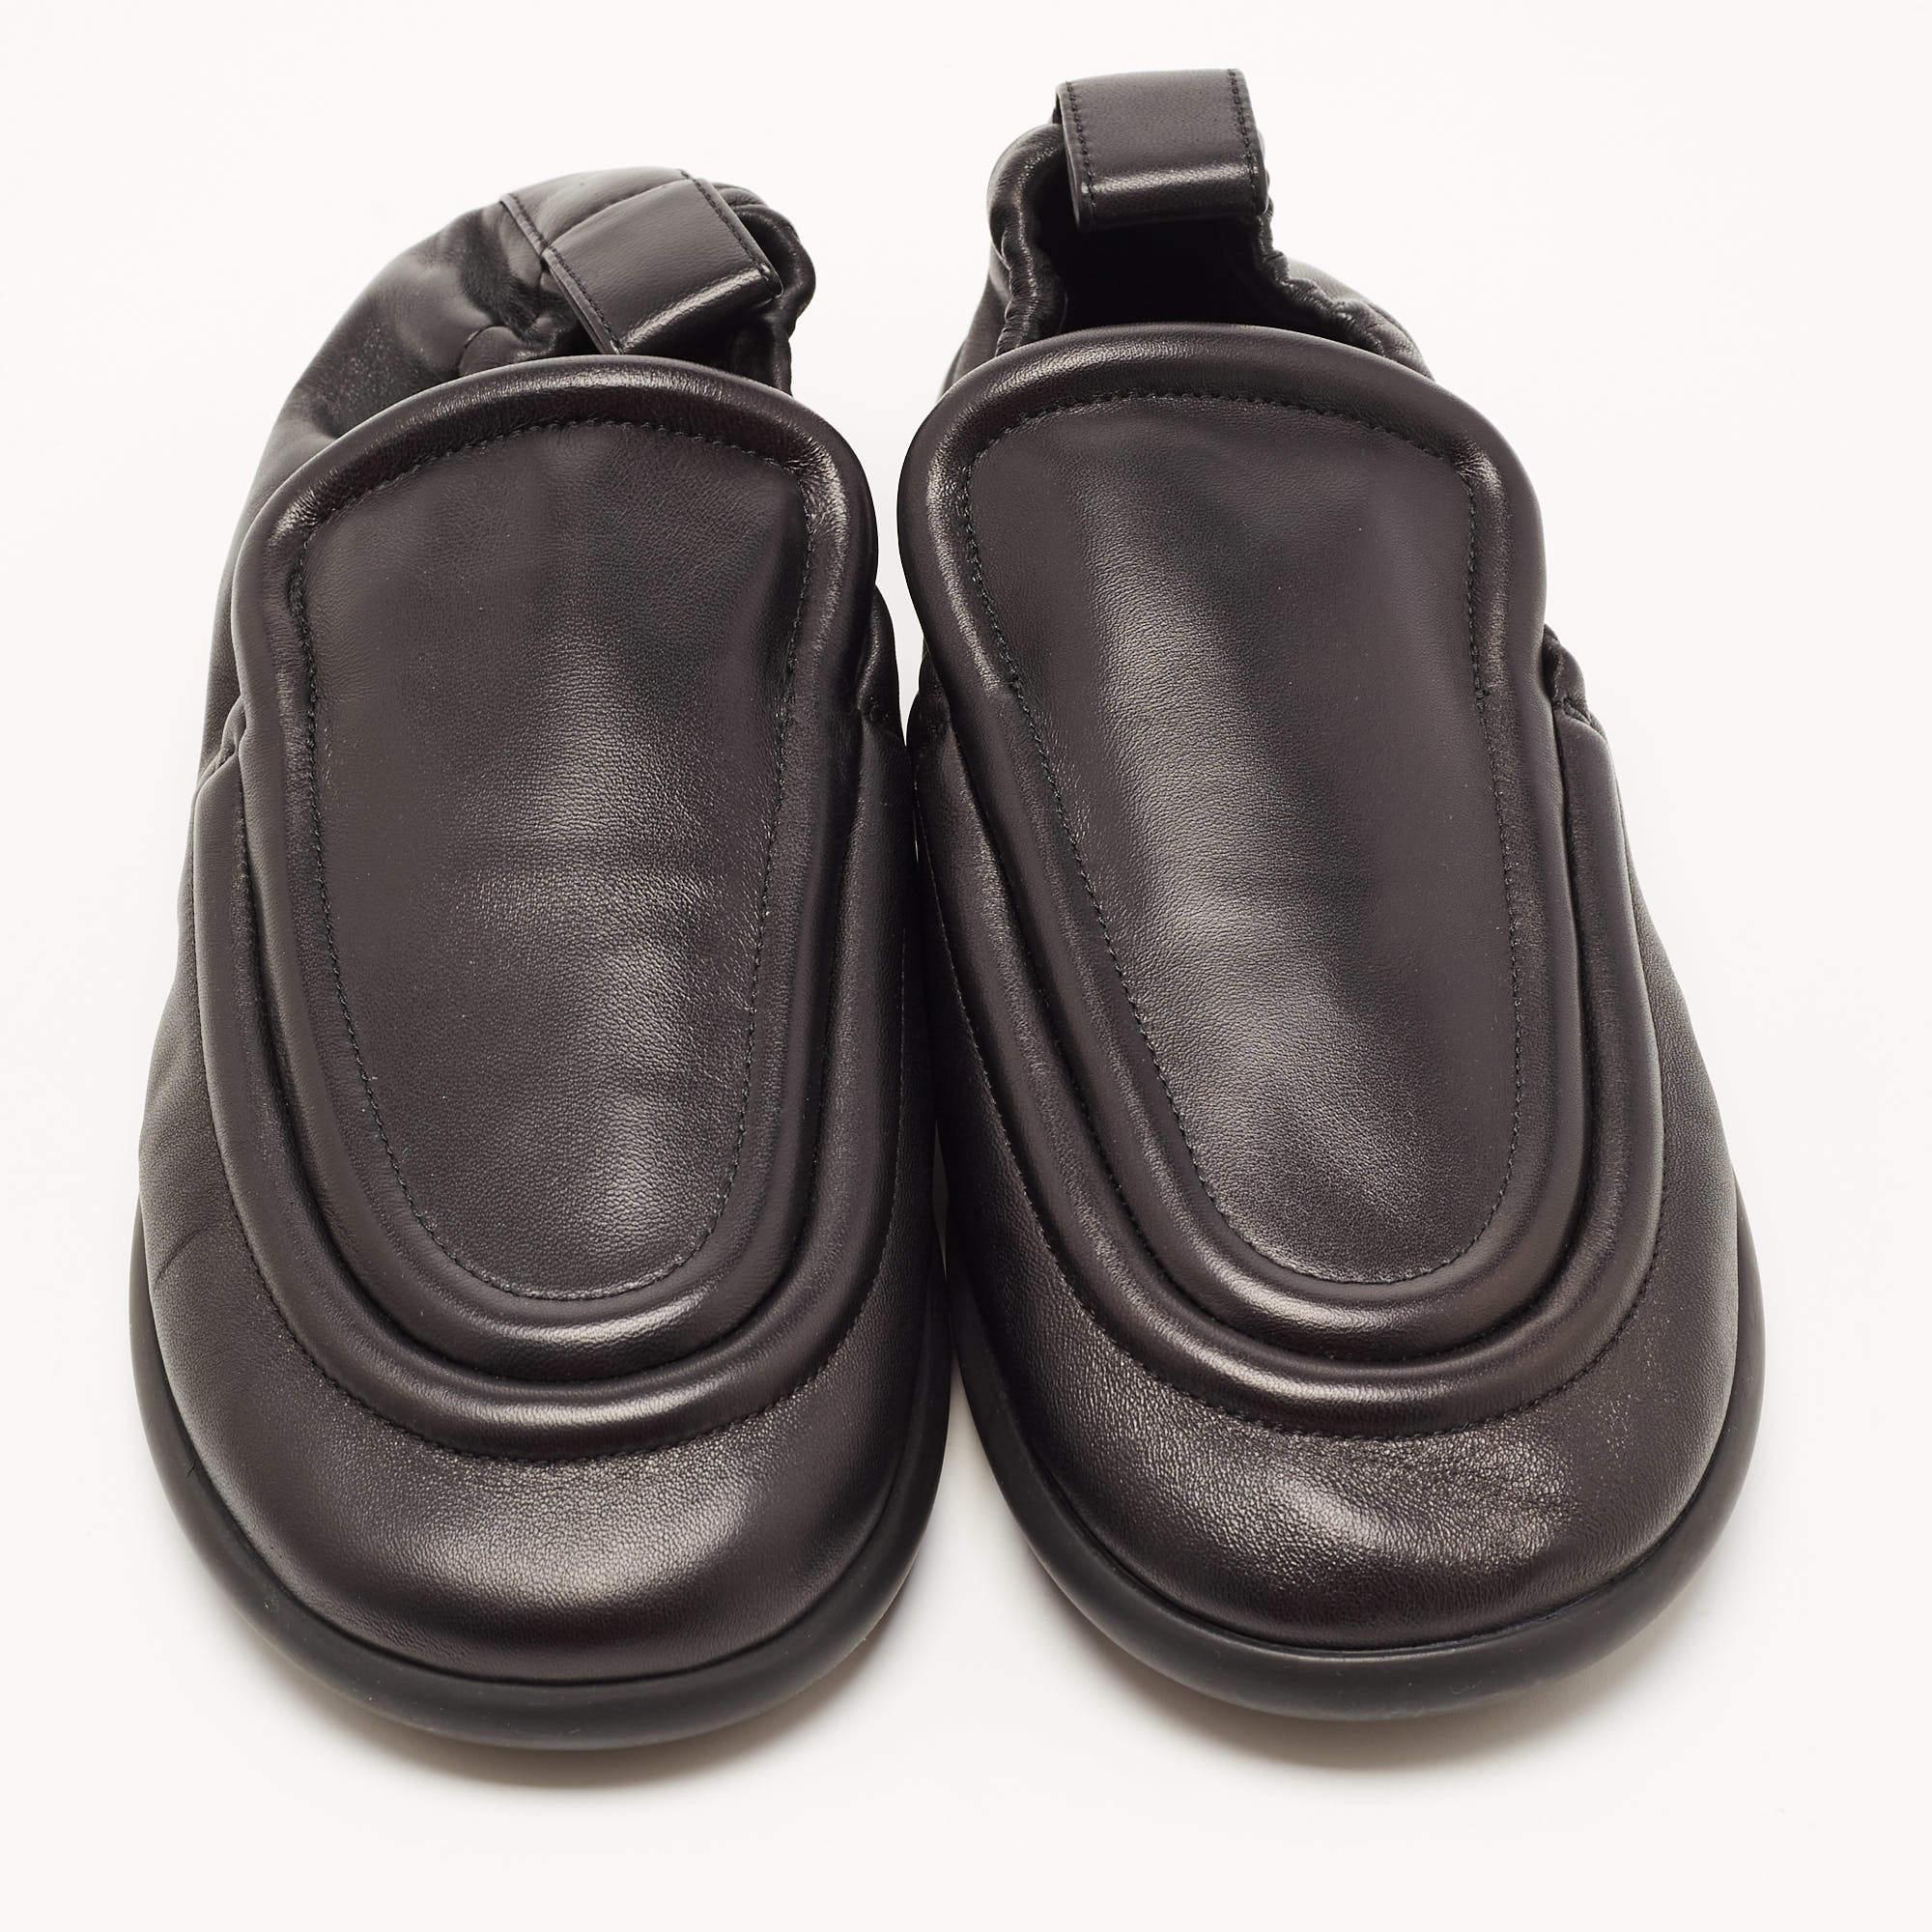 One look at this pair from Bottega Veneta and you'll know what your shoe collection has been missing all along! Crafted with excellence using leather, these smoking slippers are simply luxe. Round toes, leather insoles, and loads of comfort make the